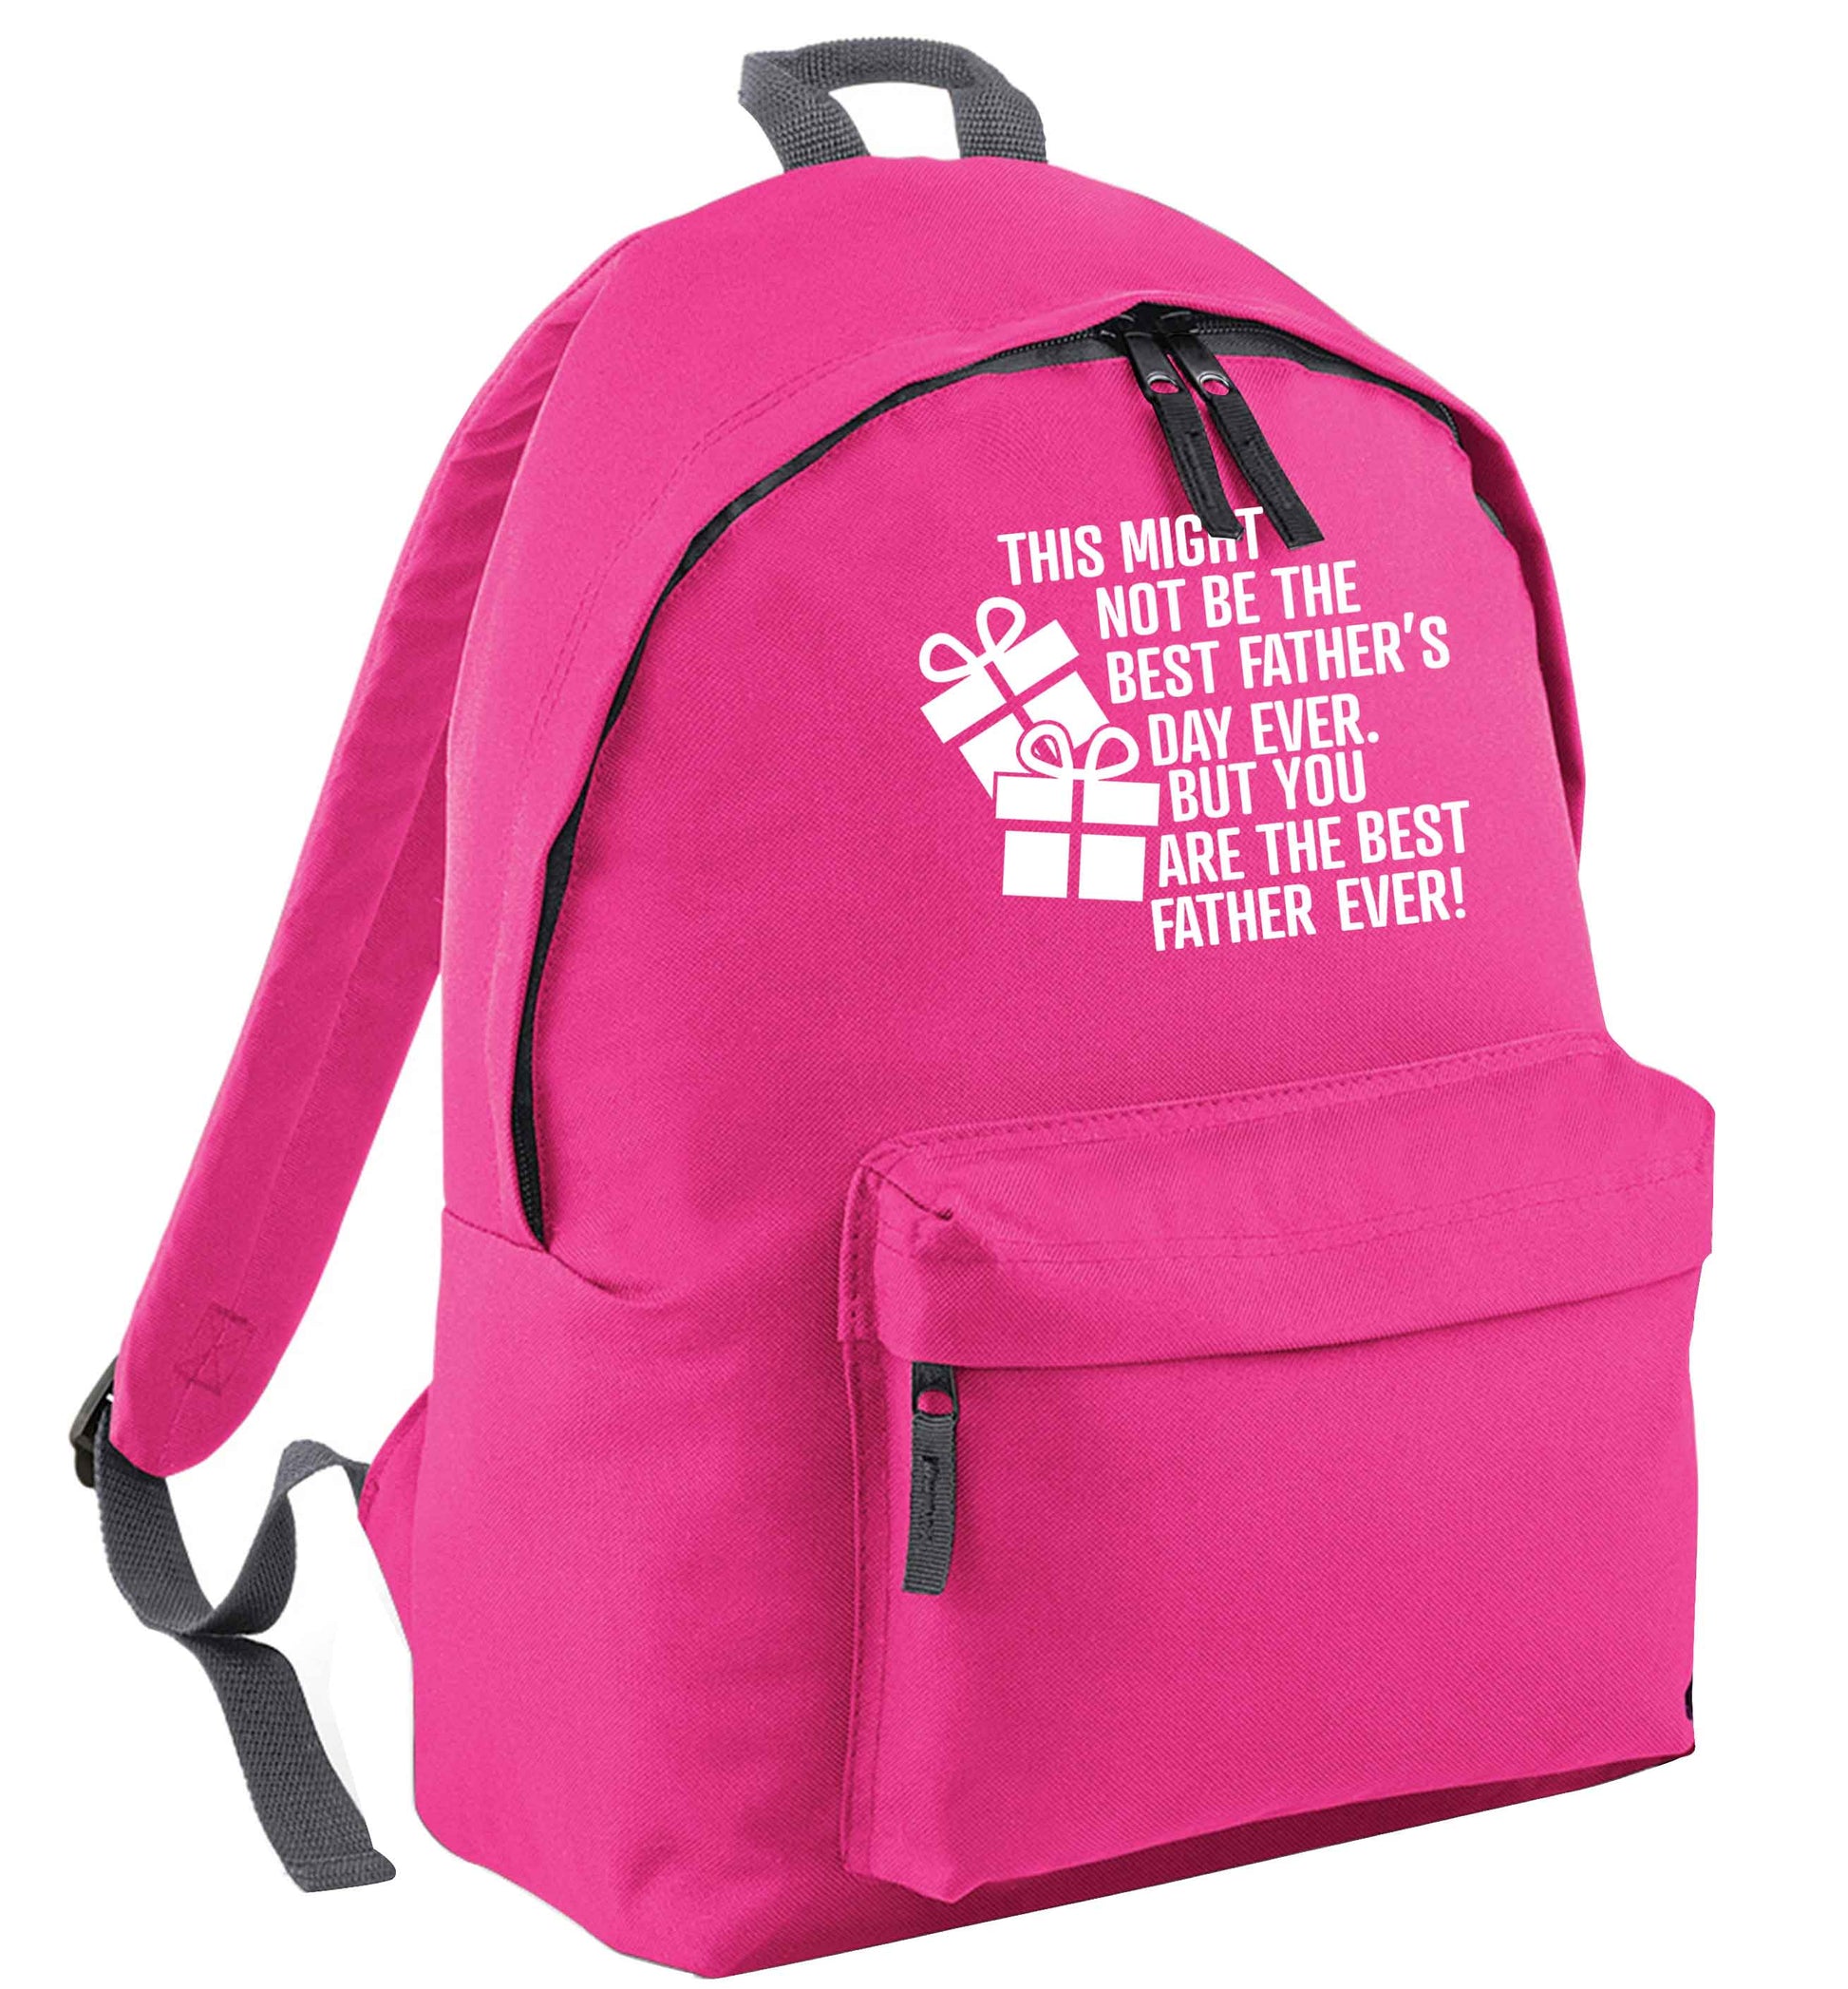 It might not be the best Father's Day ever but you are the best father ever! pink adults backpack